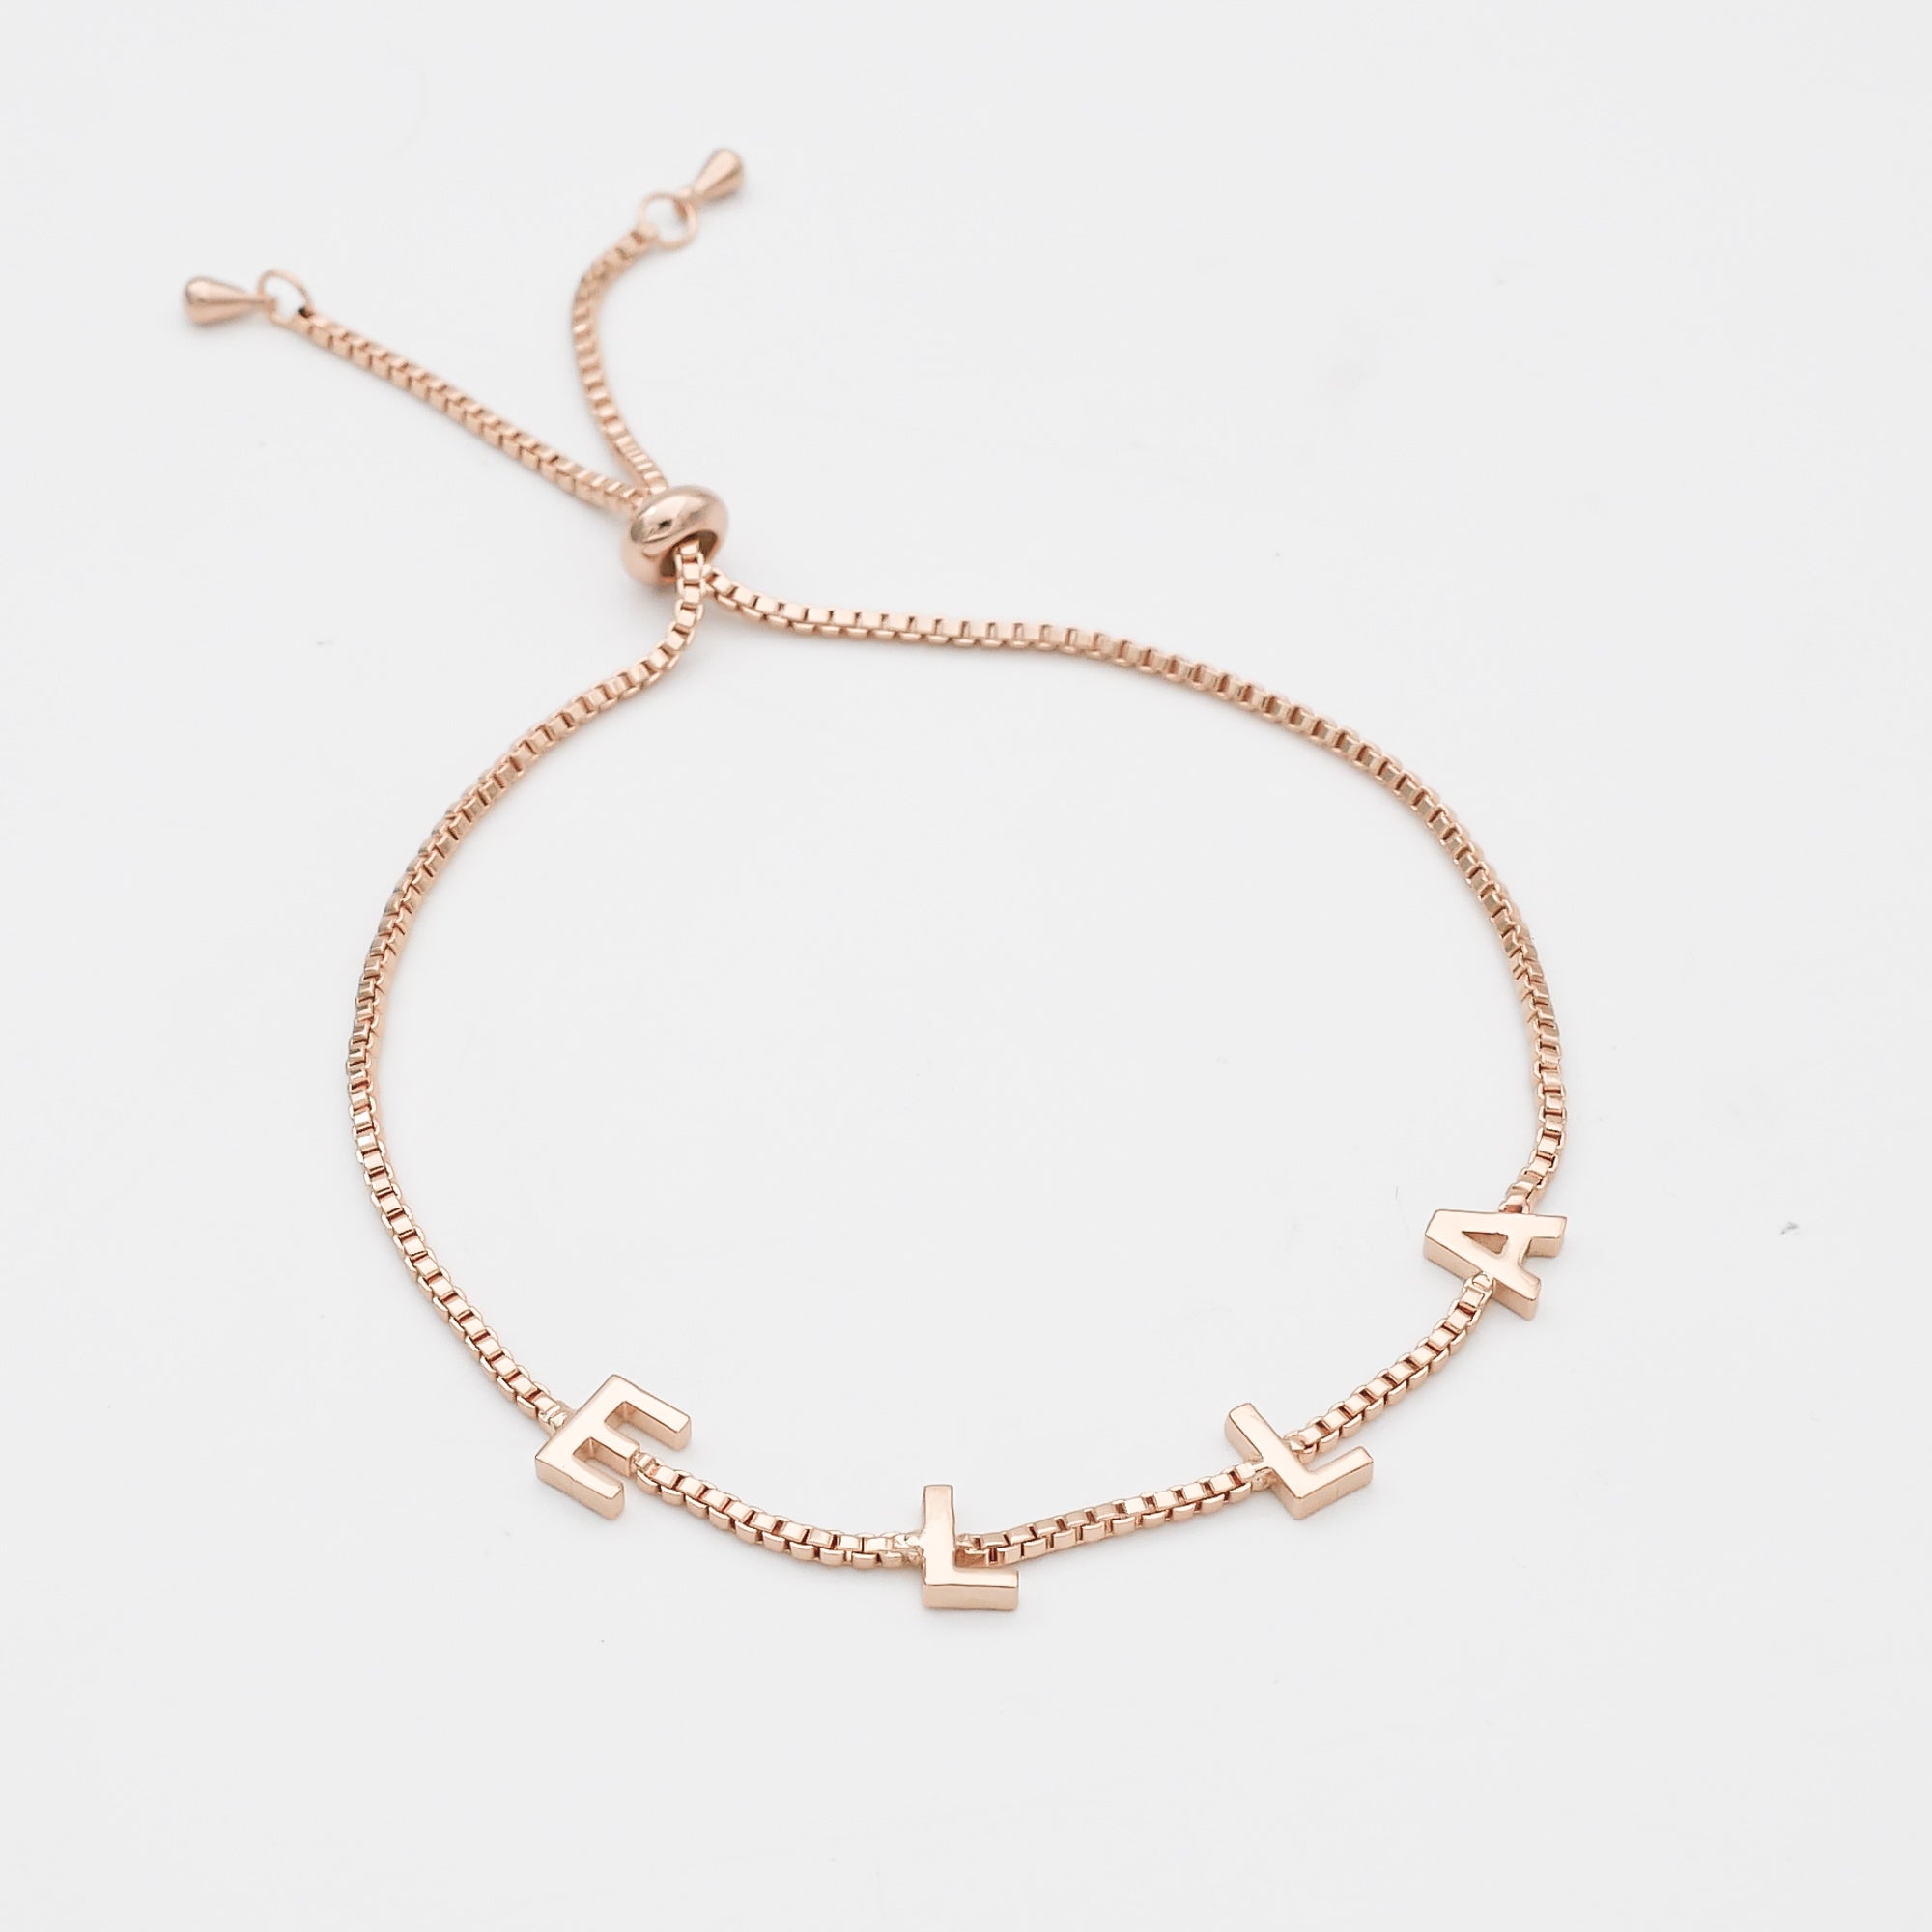 Classic personalised name bracelet in 14K rose gold with charm